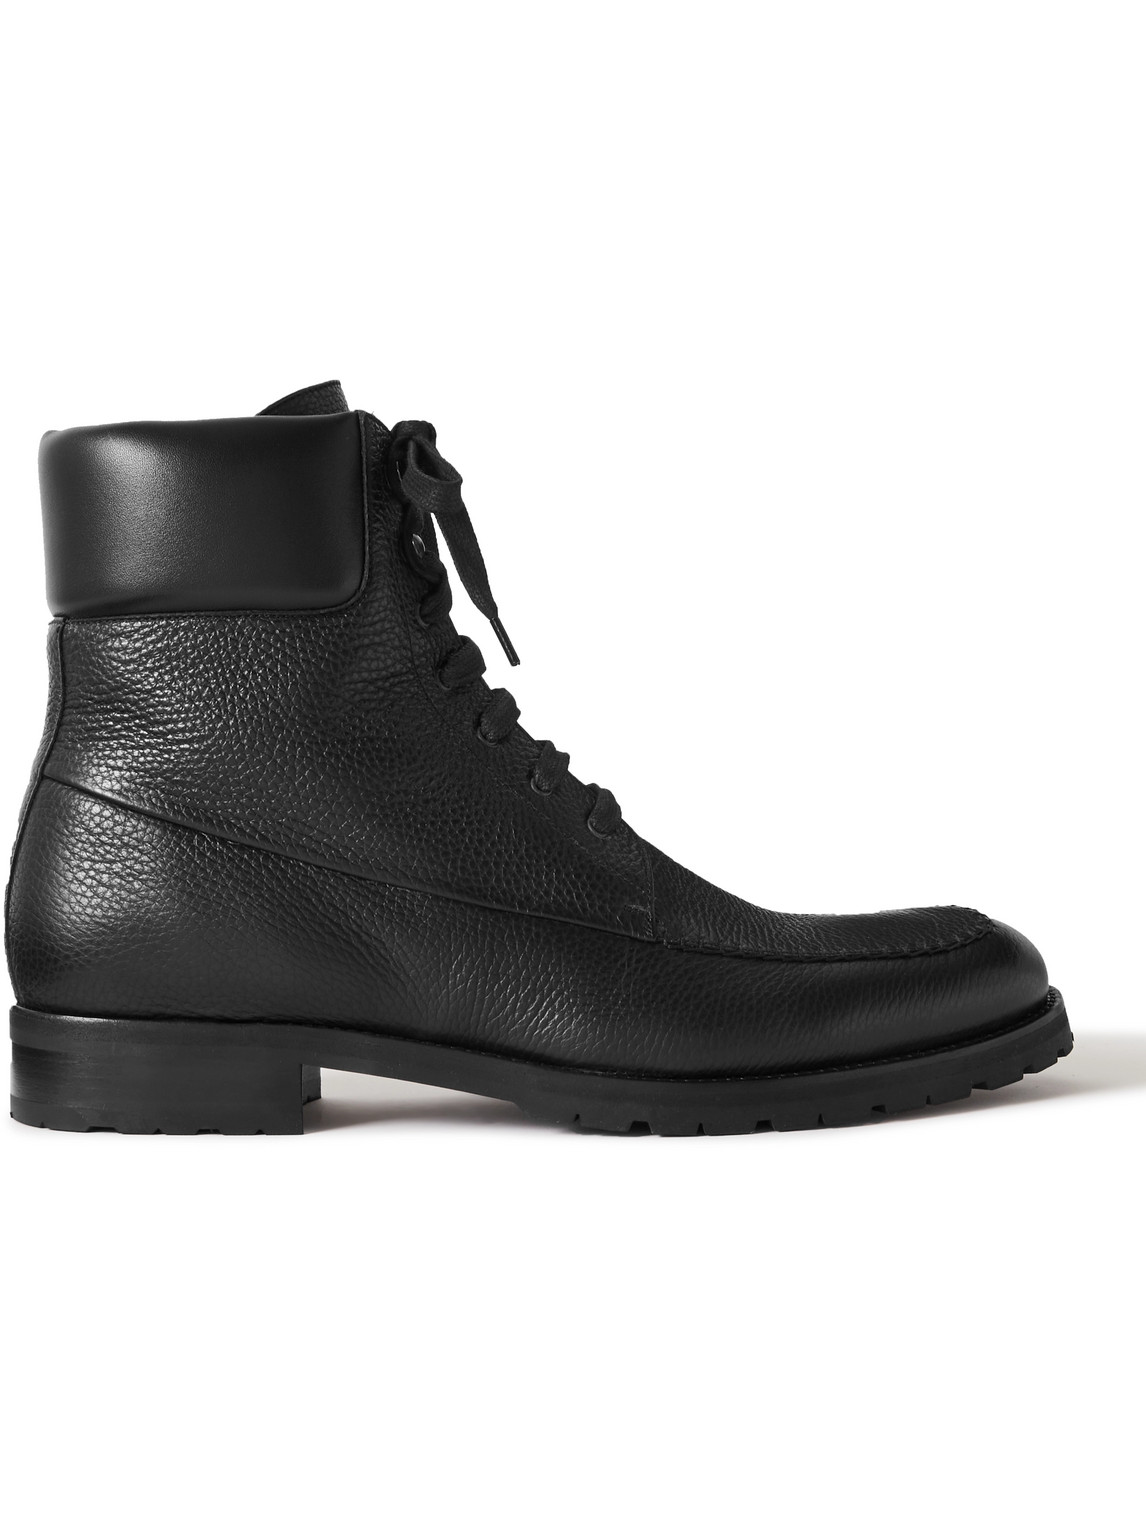 Dolomite Full-Grain Leather Lace-Up Boots